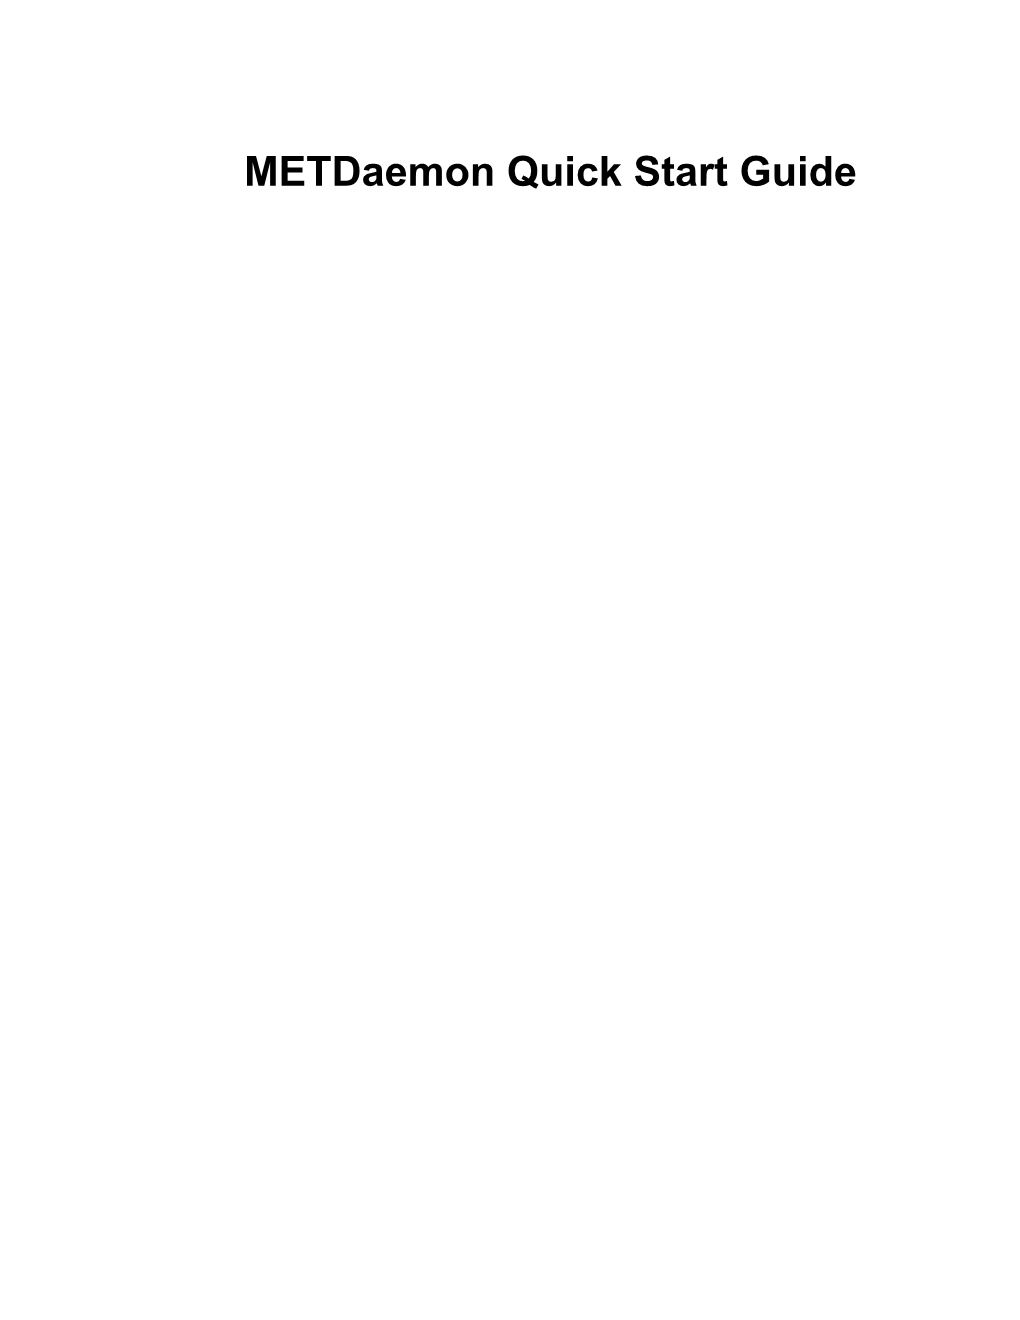 Metdaemon Quick Start Guide Metdaemon Quick Start Guide Copyright © 2004 on Time Support